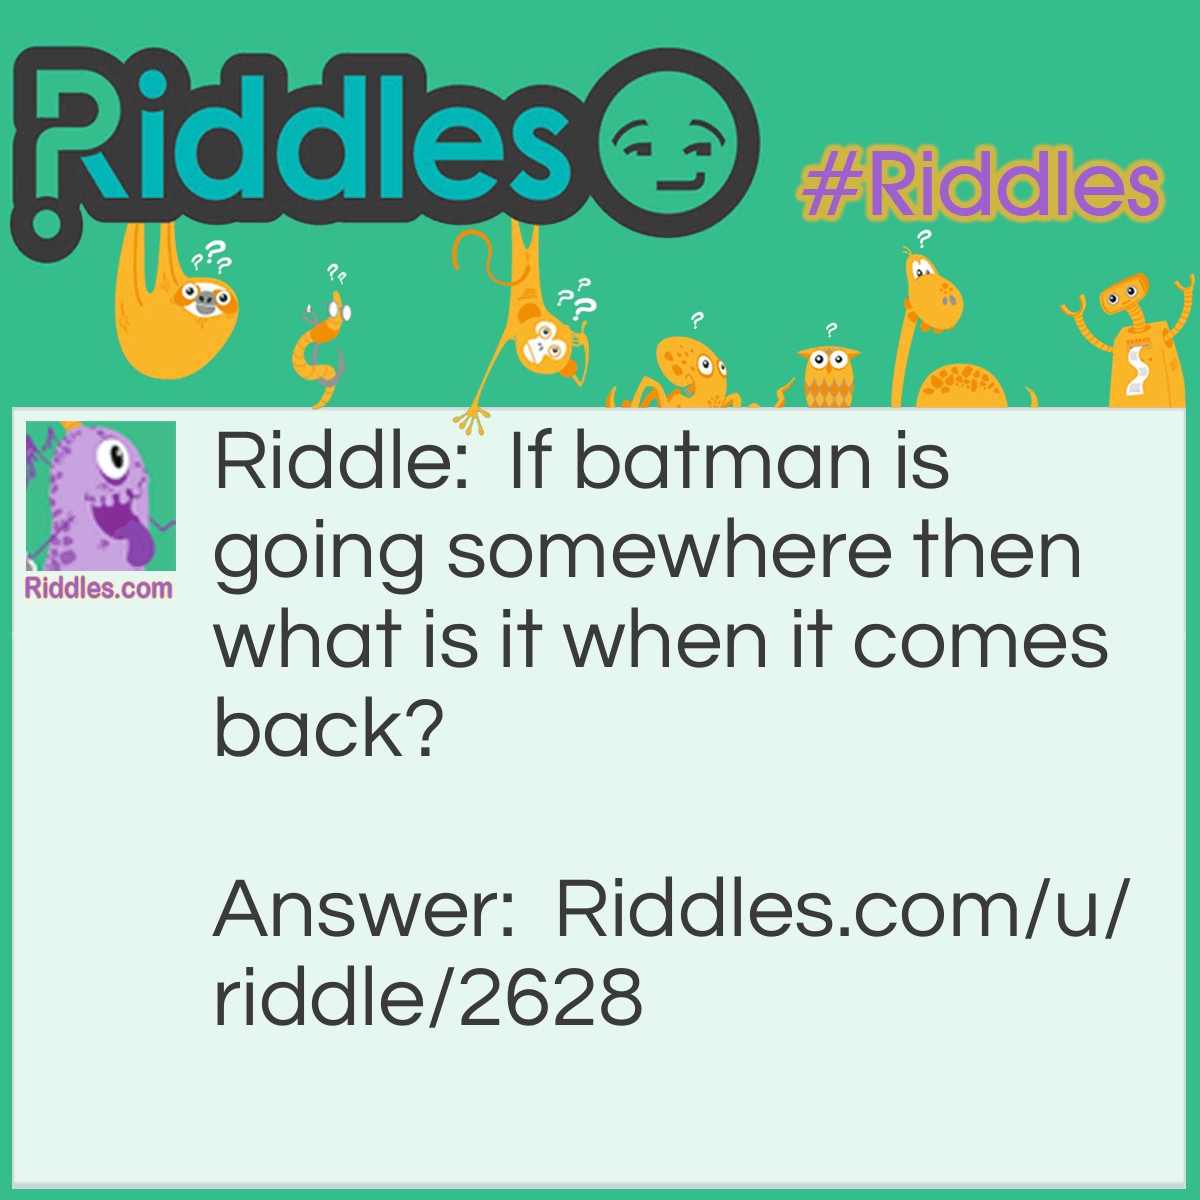 Riddle: If batman is going somewhere then what is it when it comes back? Answer: Batman Returns.